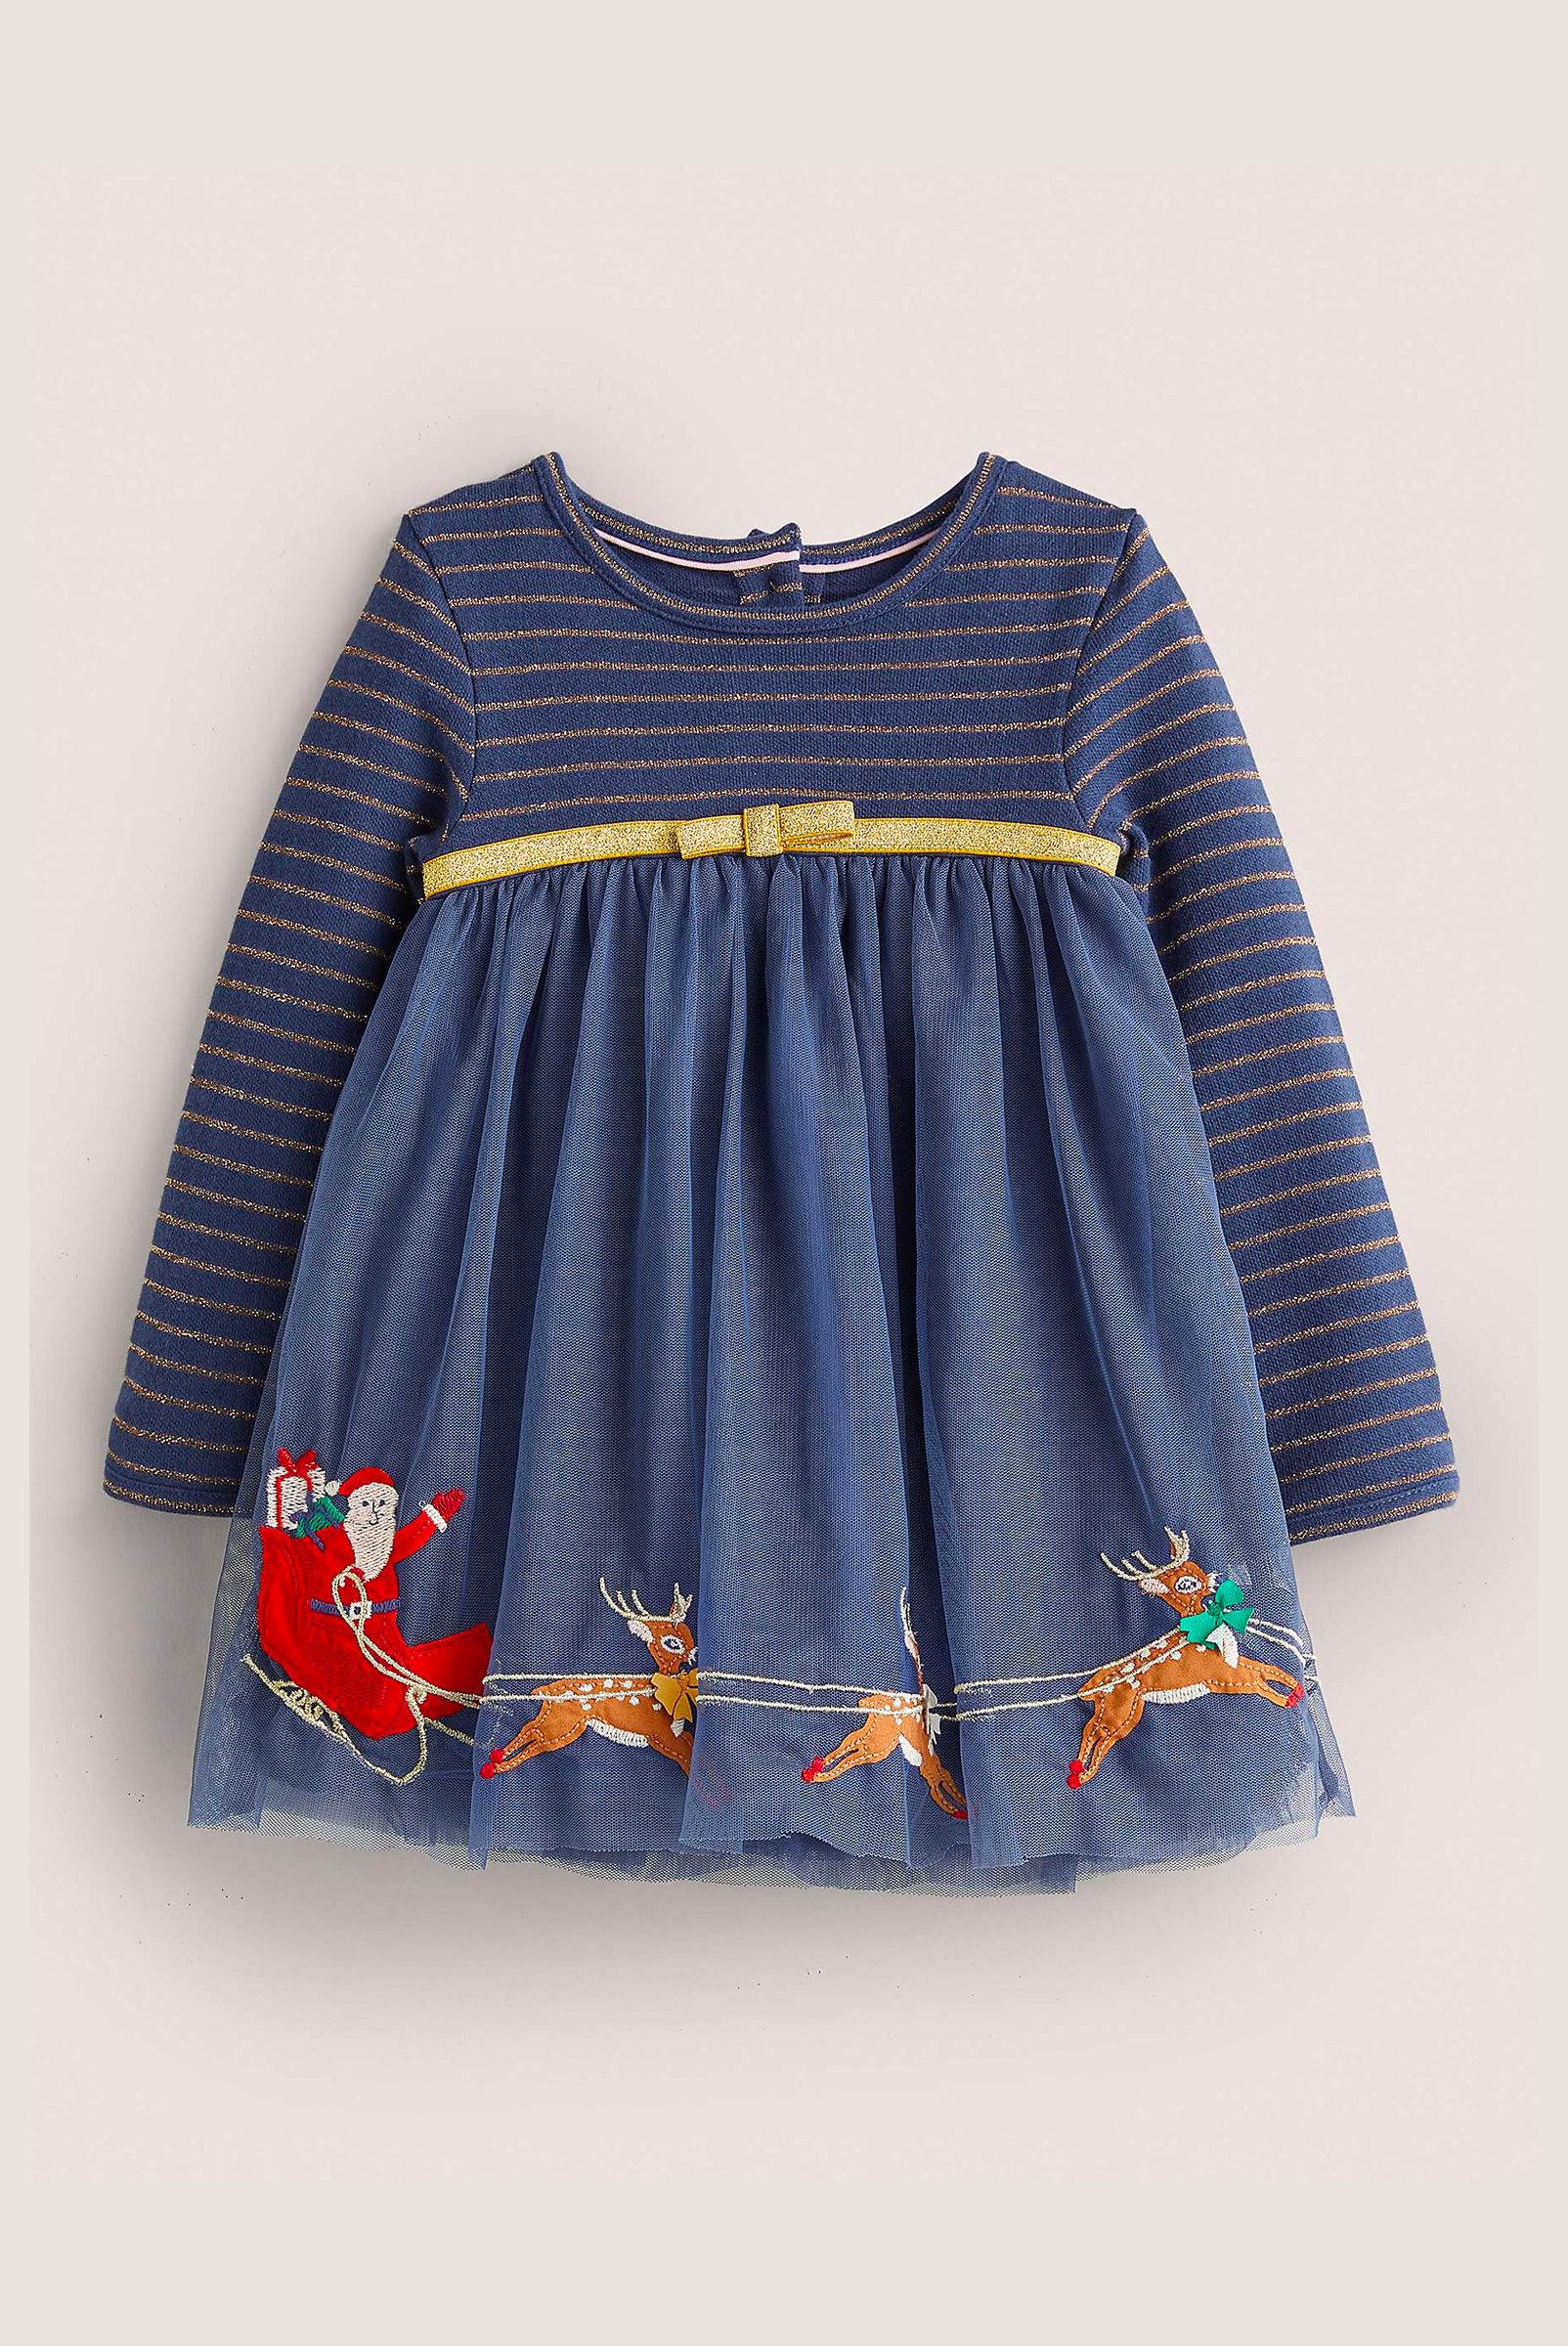 Mini Boden Baby Tulle Christmas Party Dress, £24.50